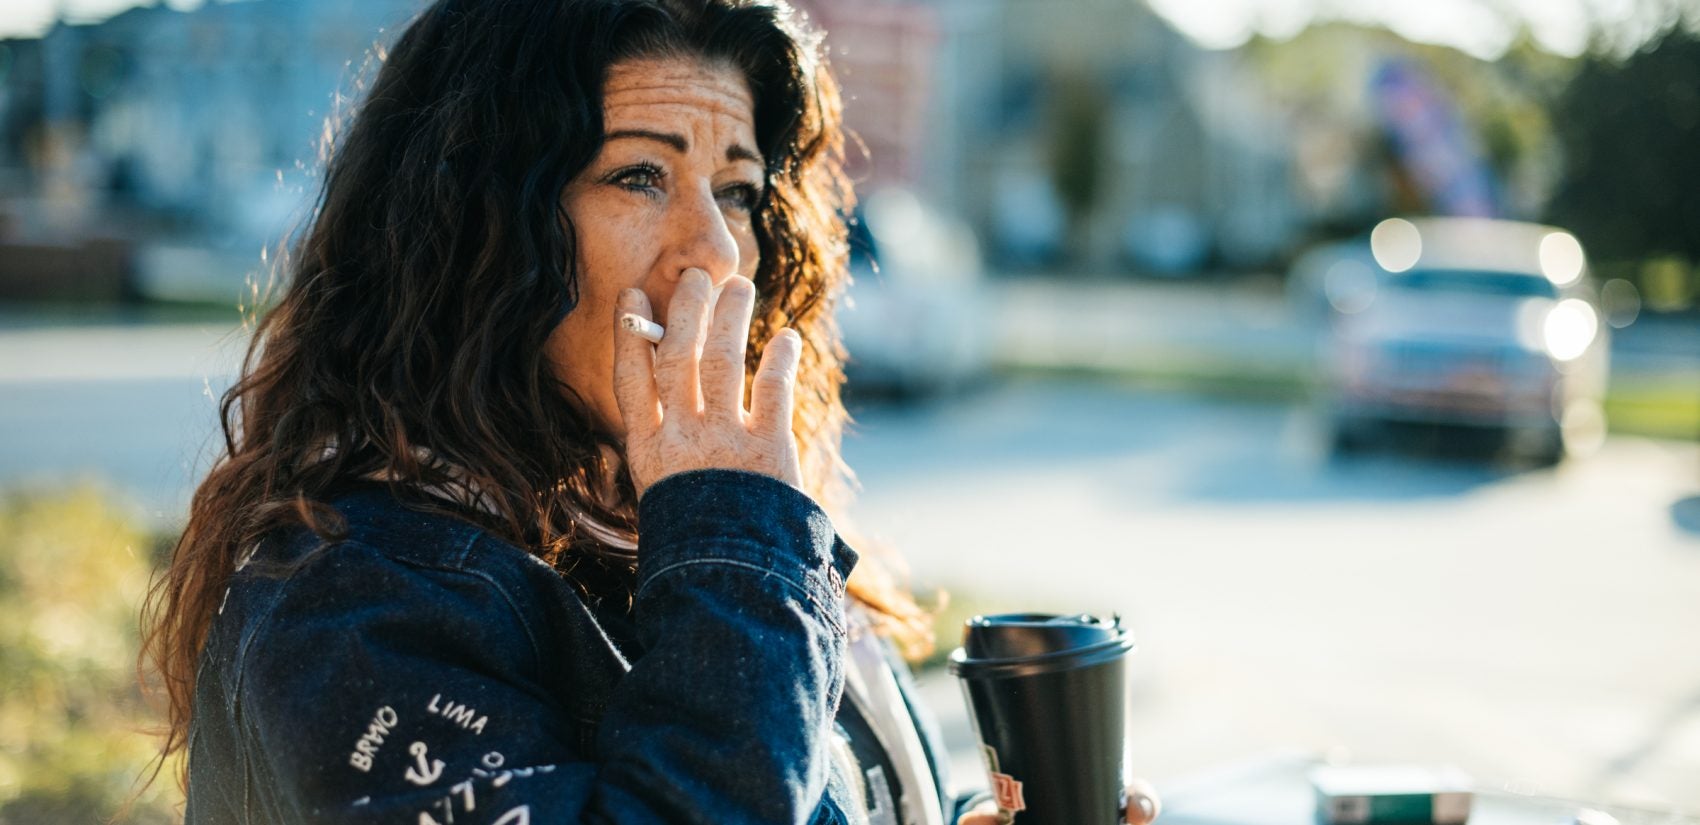 Redina pauses for a few minutes outside of the Sheetz in Shippensburg to sip her coffee and smoke a cigarette.